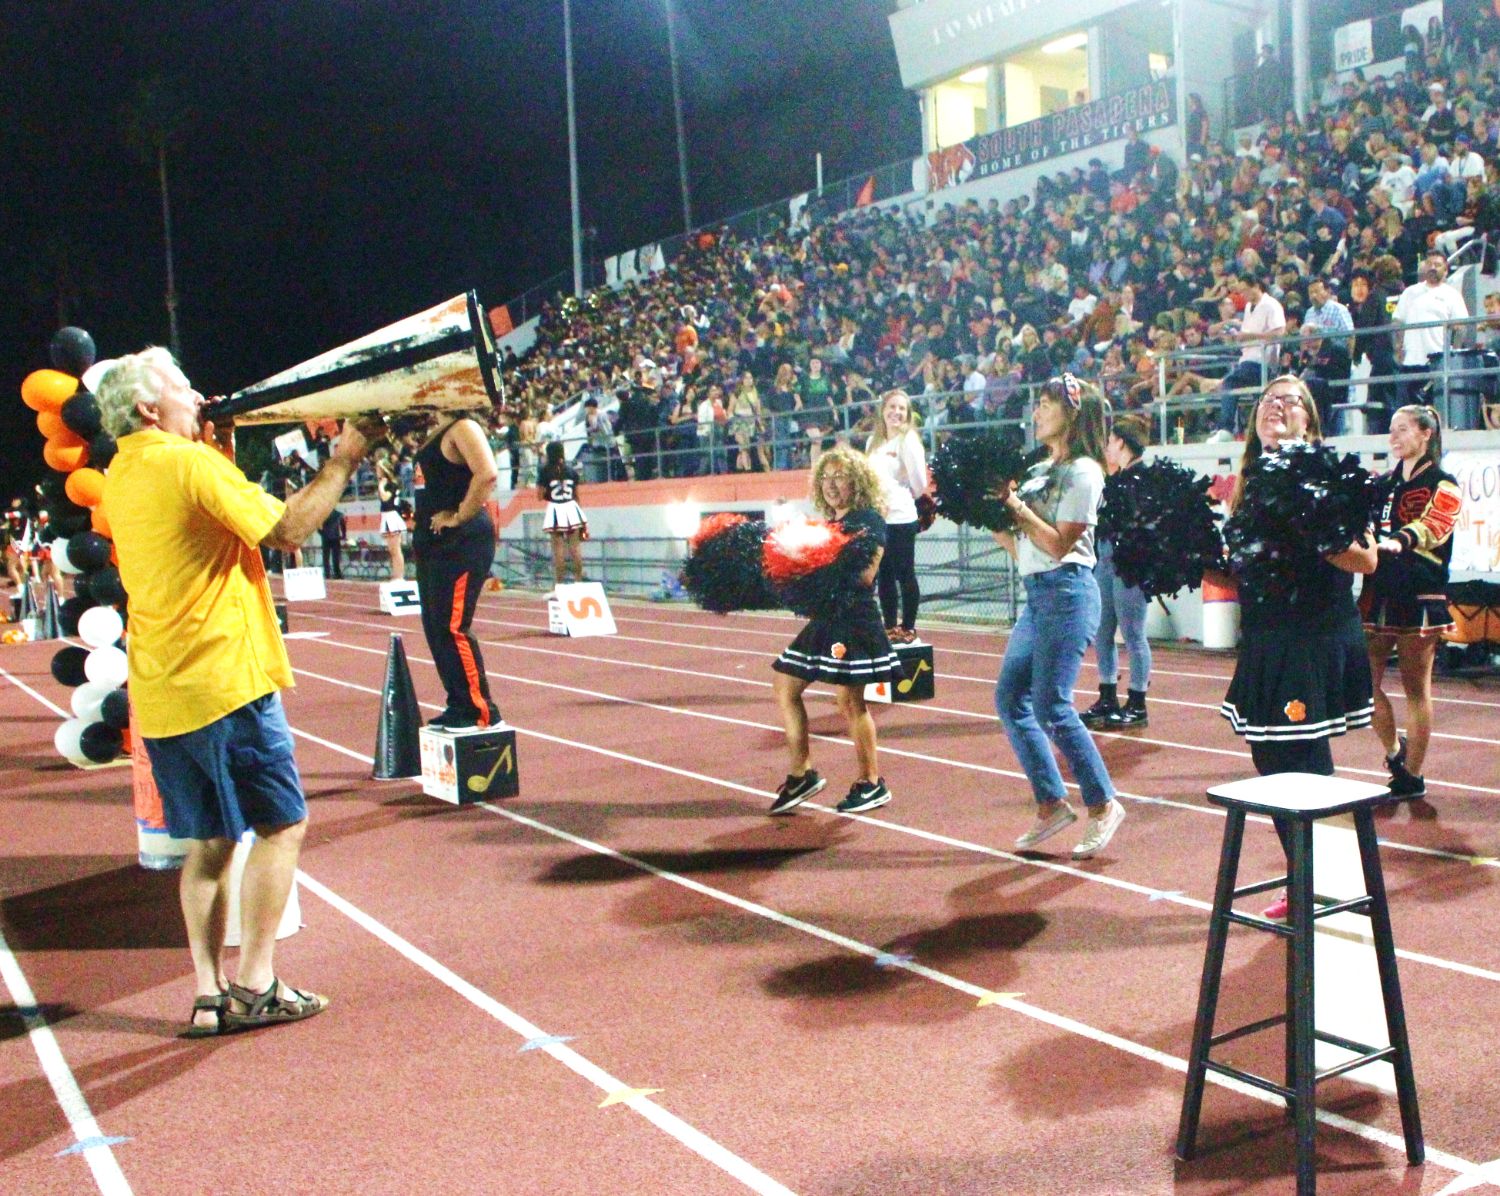 PHOTO: Henk Friezer | The South Pasadenan | Alumni join current SPHS cheerleaders on the field for Homecoming 2023.